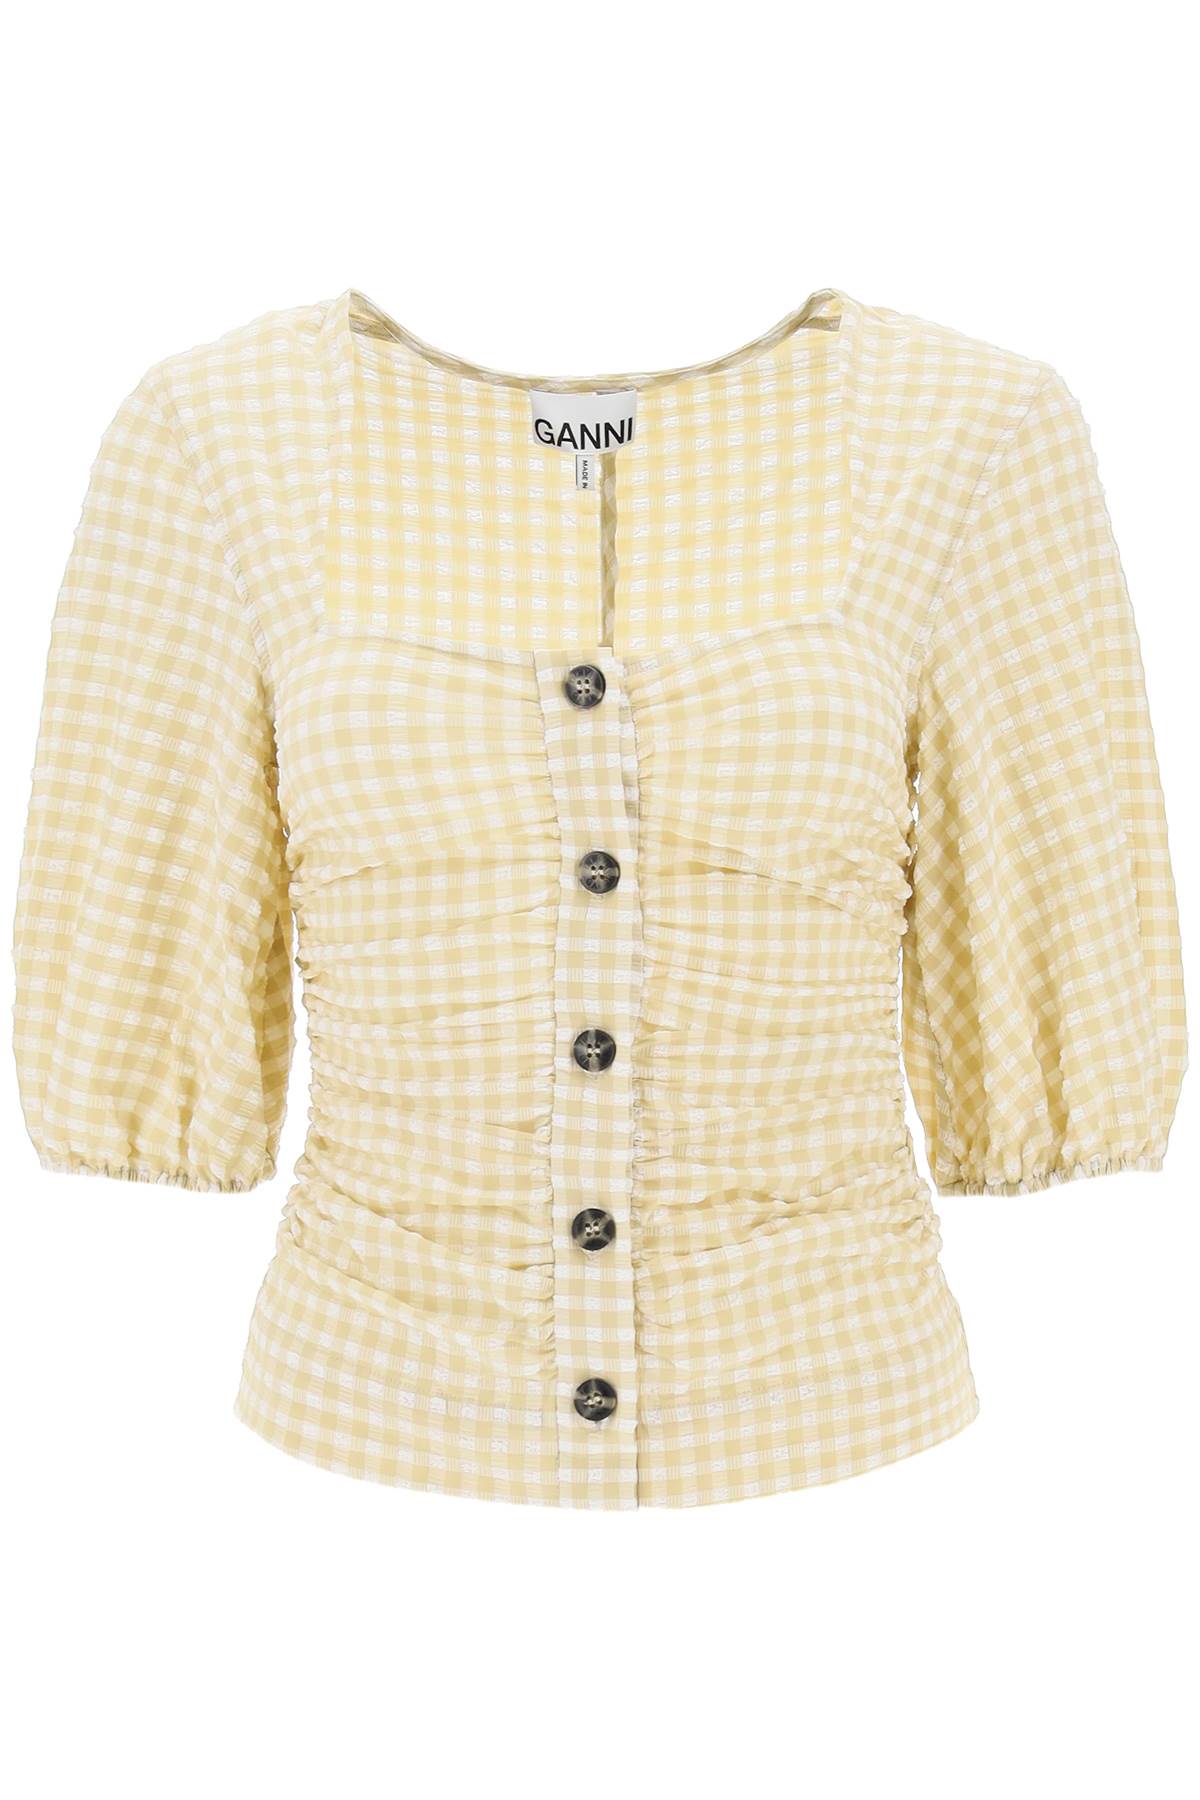 Ganni gathered blouse with gingham motif-0